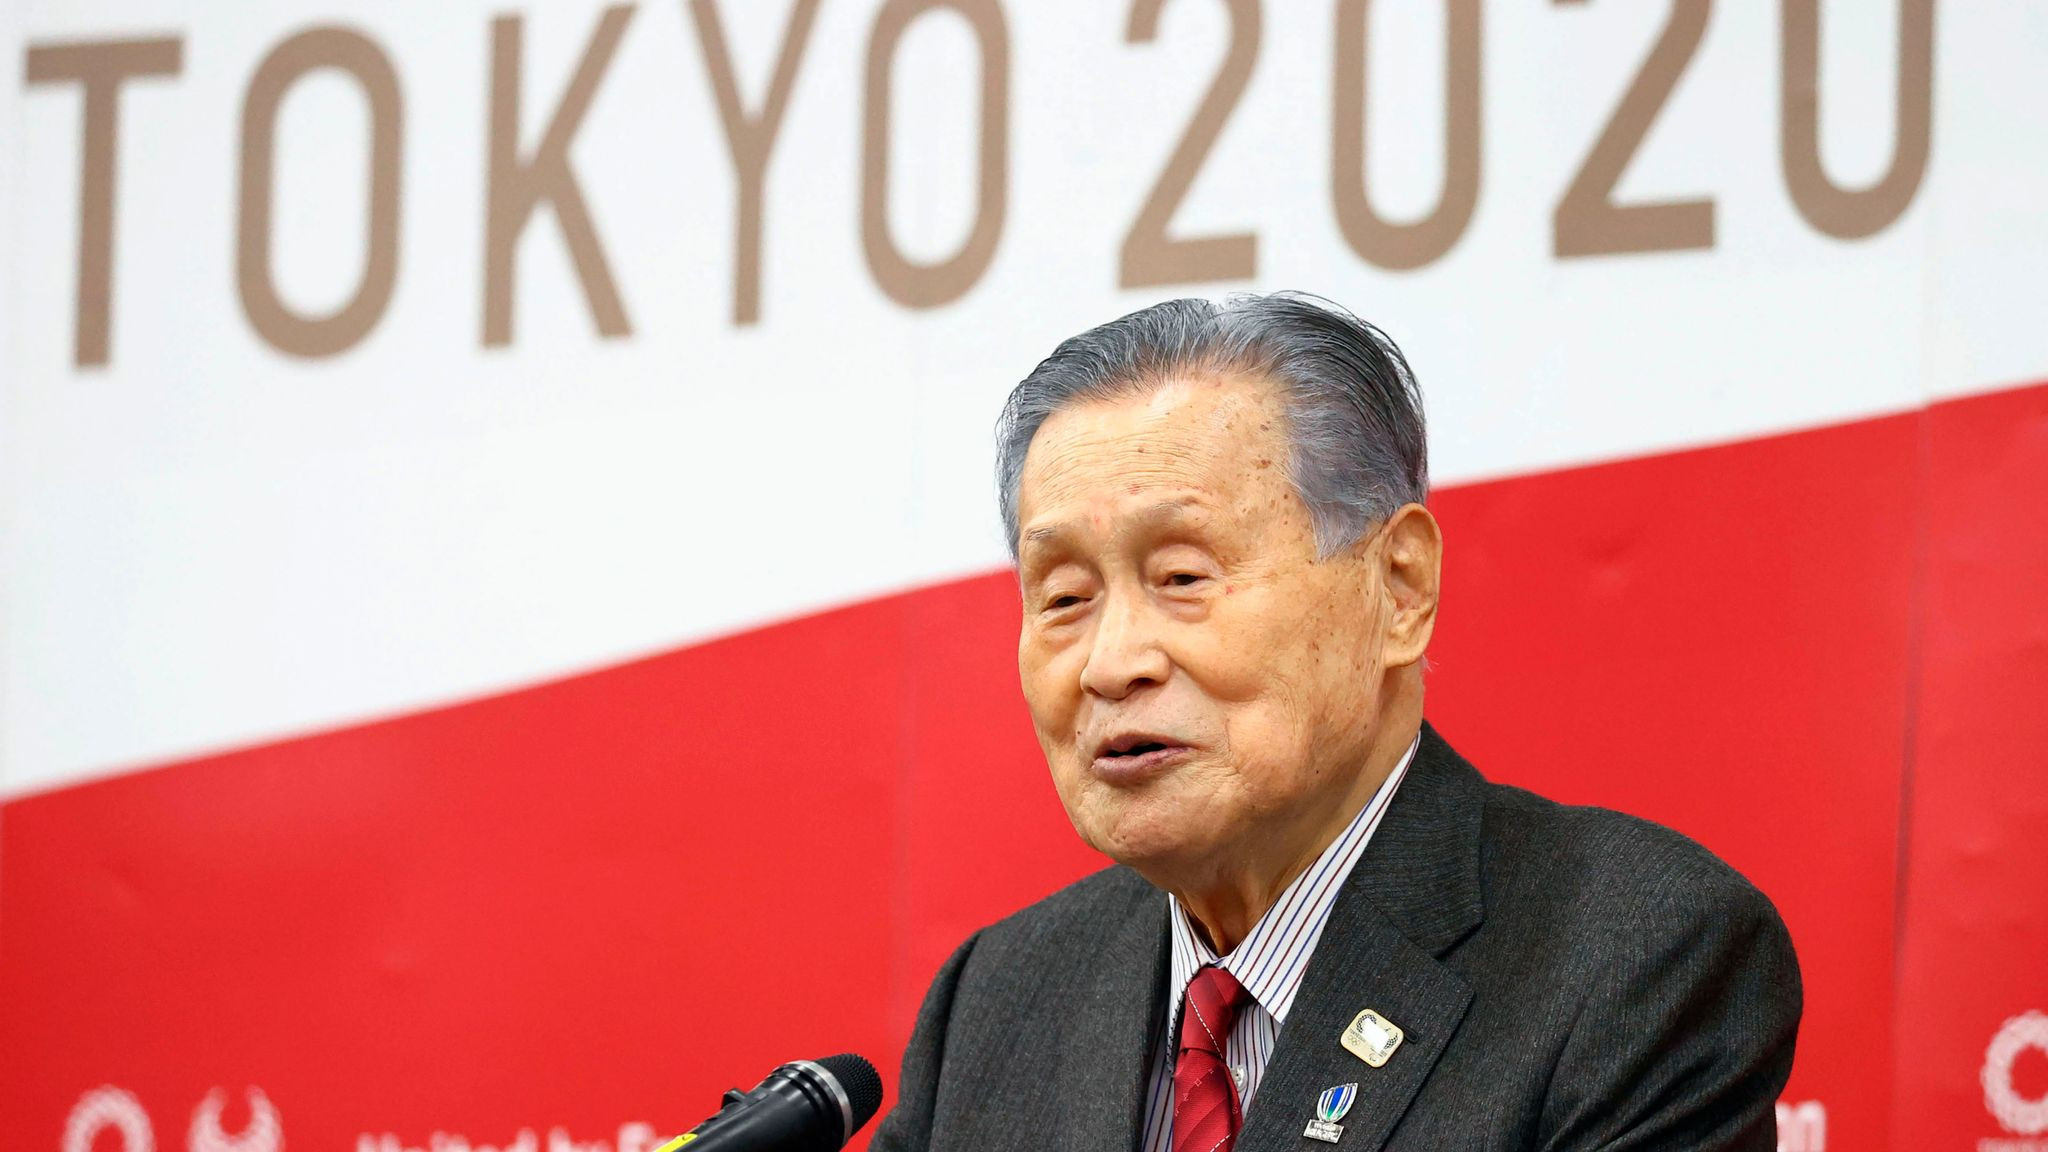 Former Tokyo 2020 President claims Zelenskyy as much to blame for war as Putin